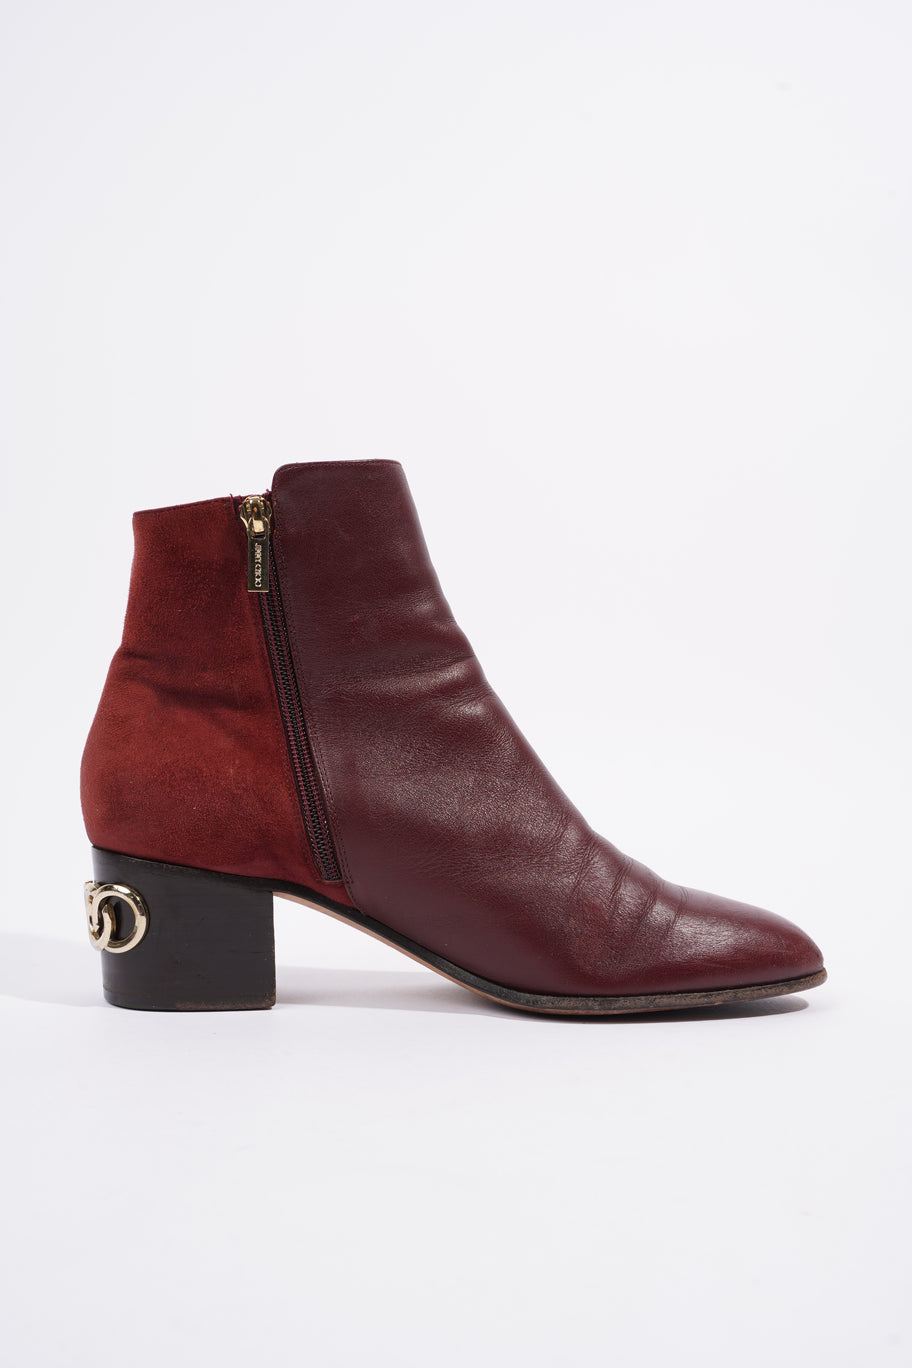 Ankle Boot Red Leather EU 41 UK 8 Image 4